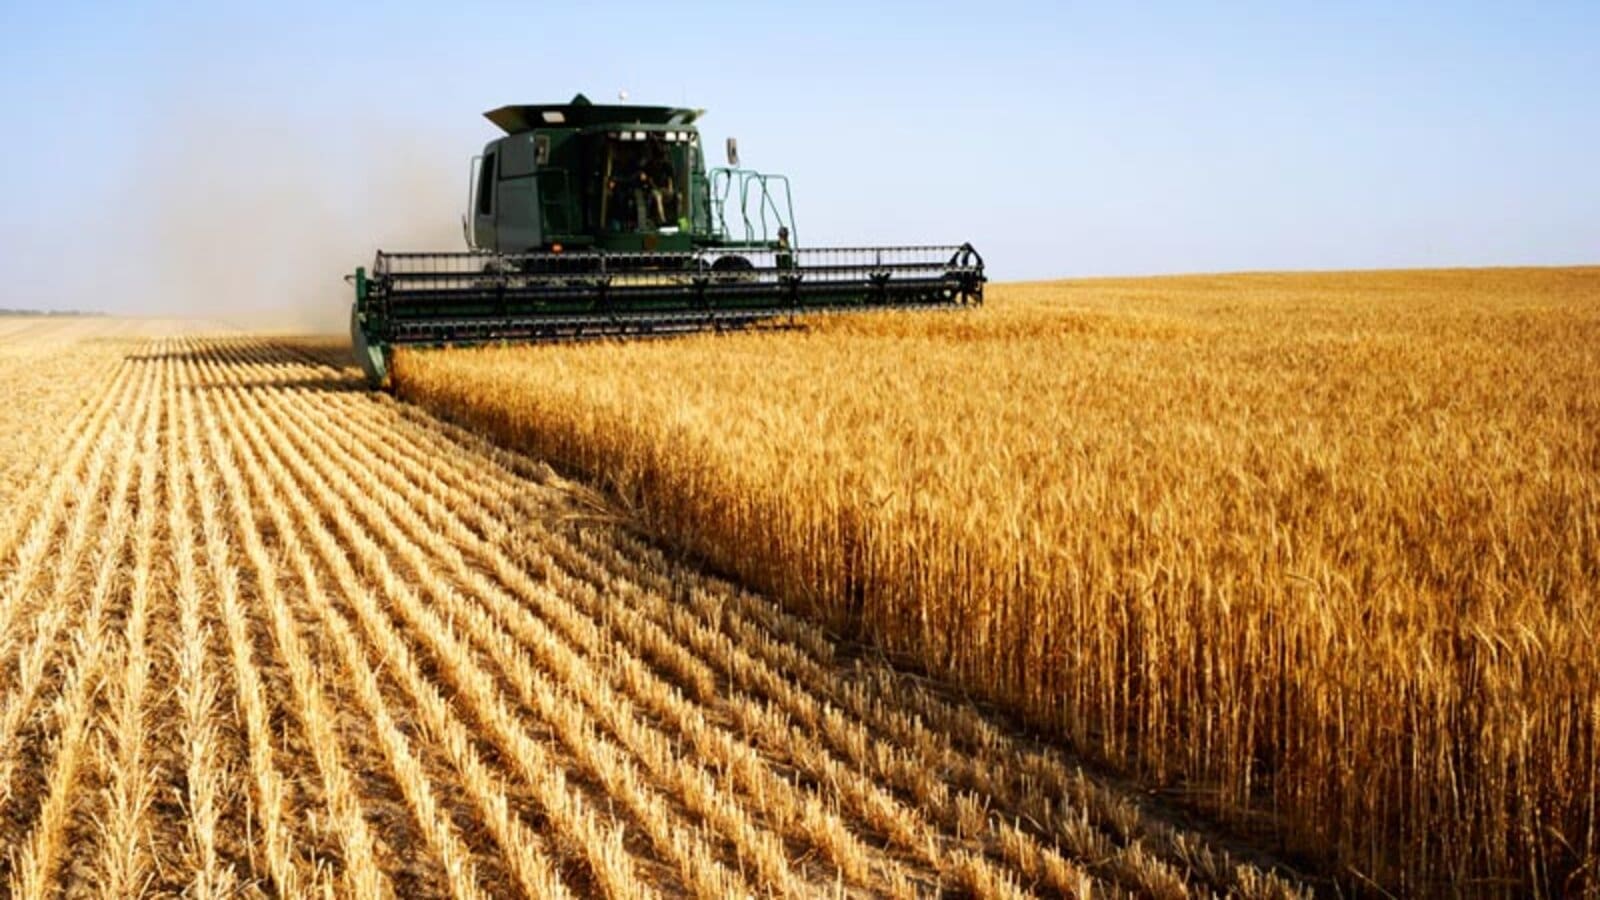 Korean wheat cultivation aims for self-sufficiency with record-breaking production: USDA